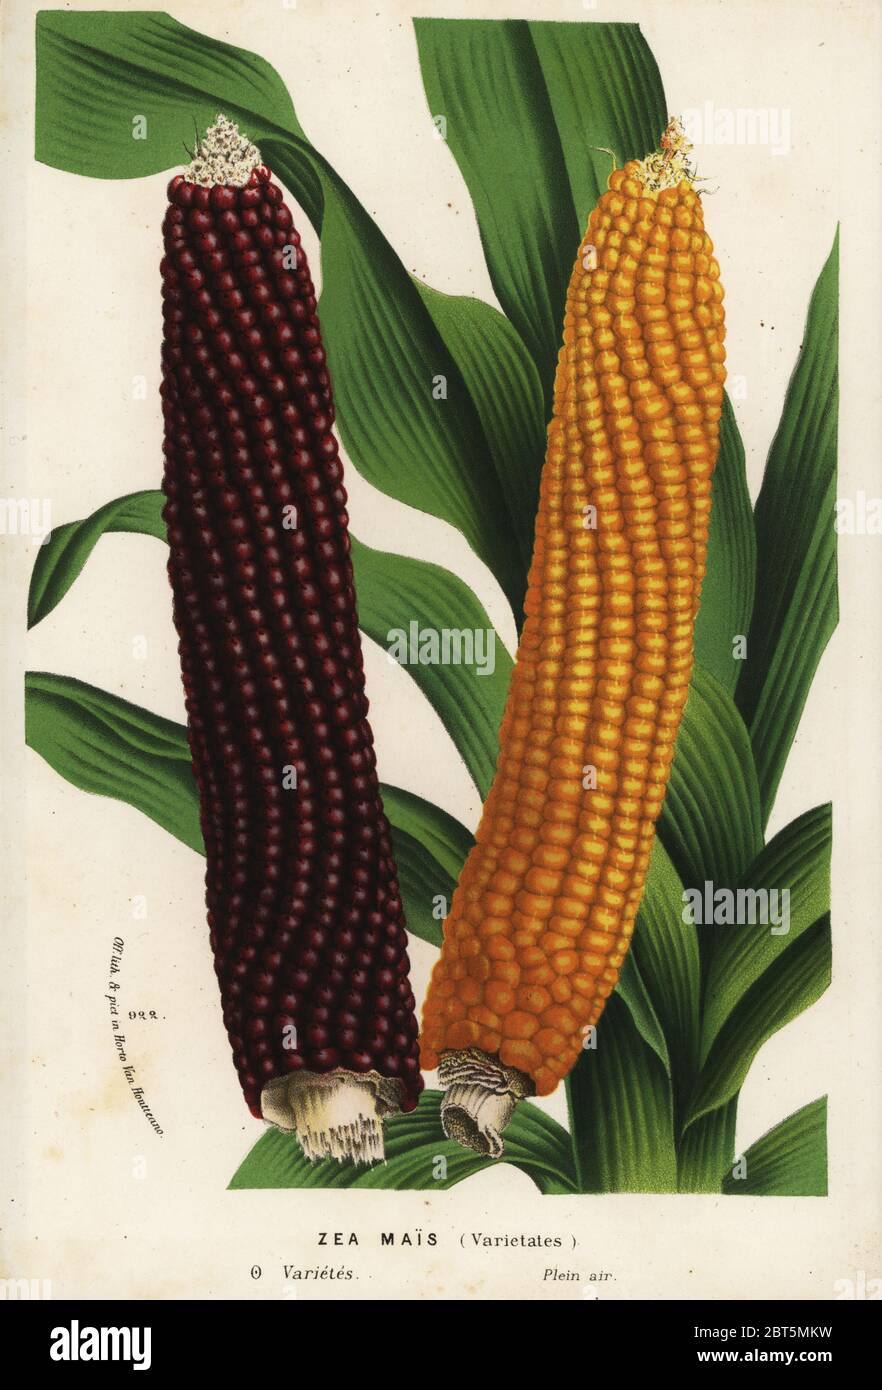 Varieties of maize, Zea mays (Zea mais). Handcoloured lithograph from Louis van Houtte and Charles Lemaire's Flowers of the Gardens and Hothouses of Europe, Flore des Serres et des Jardins de l'Europe, Ghent, Belgium, 1870. Stock Photo